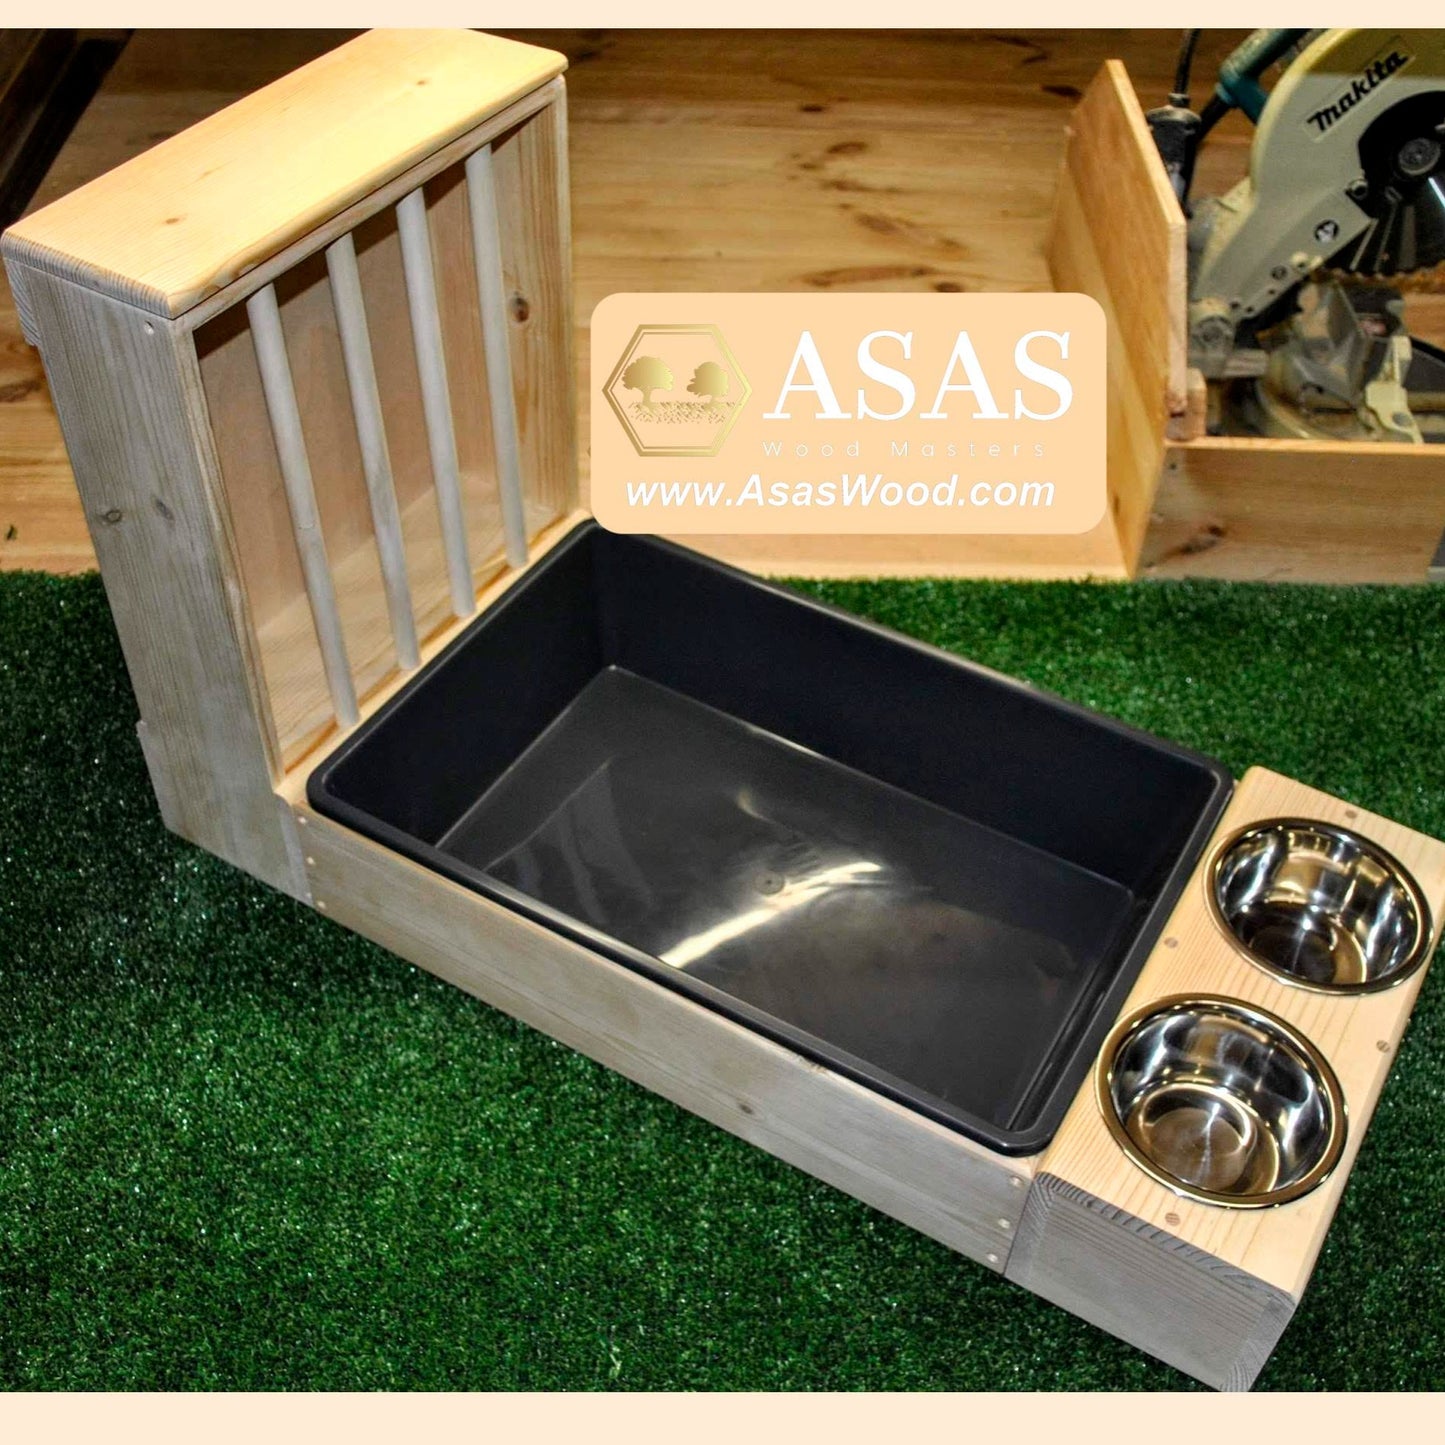 Rabbit hay feeder with litter box and food bowls